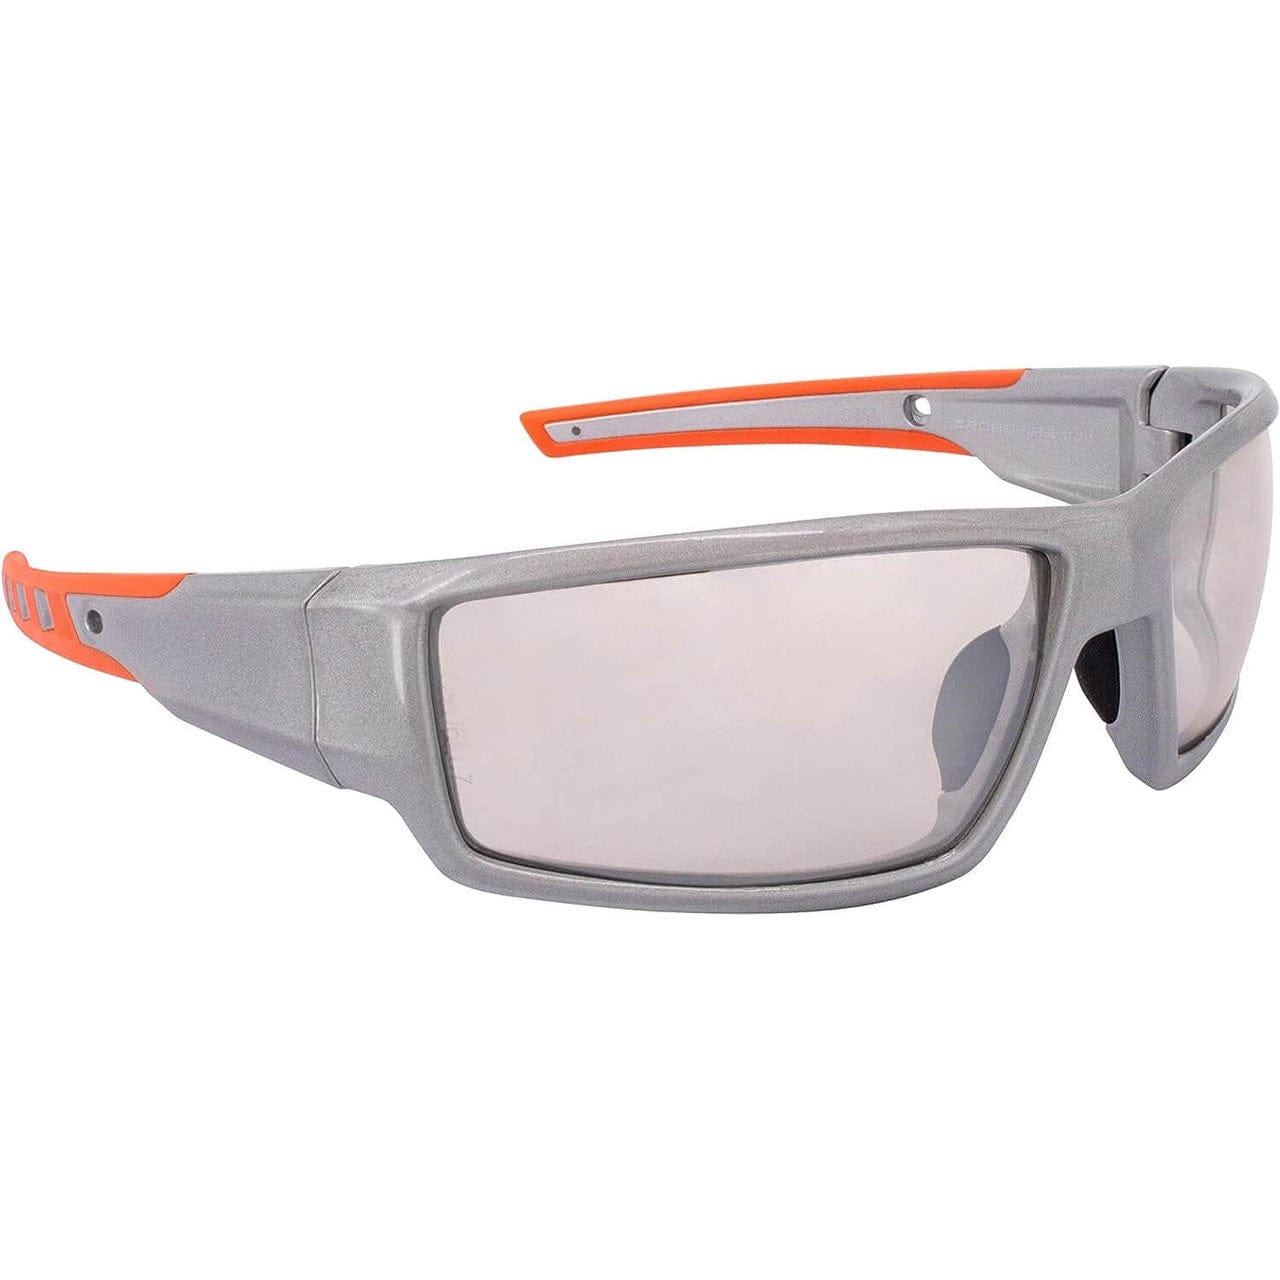 Crossfire Cumulus 412215 Safety Glasses Profile View